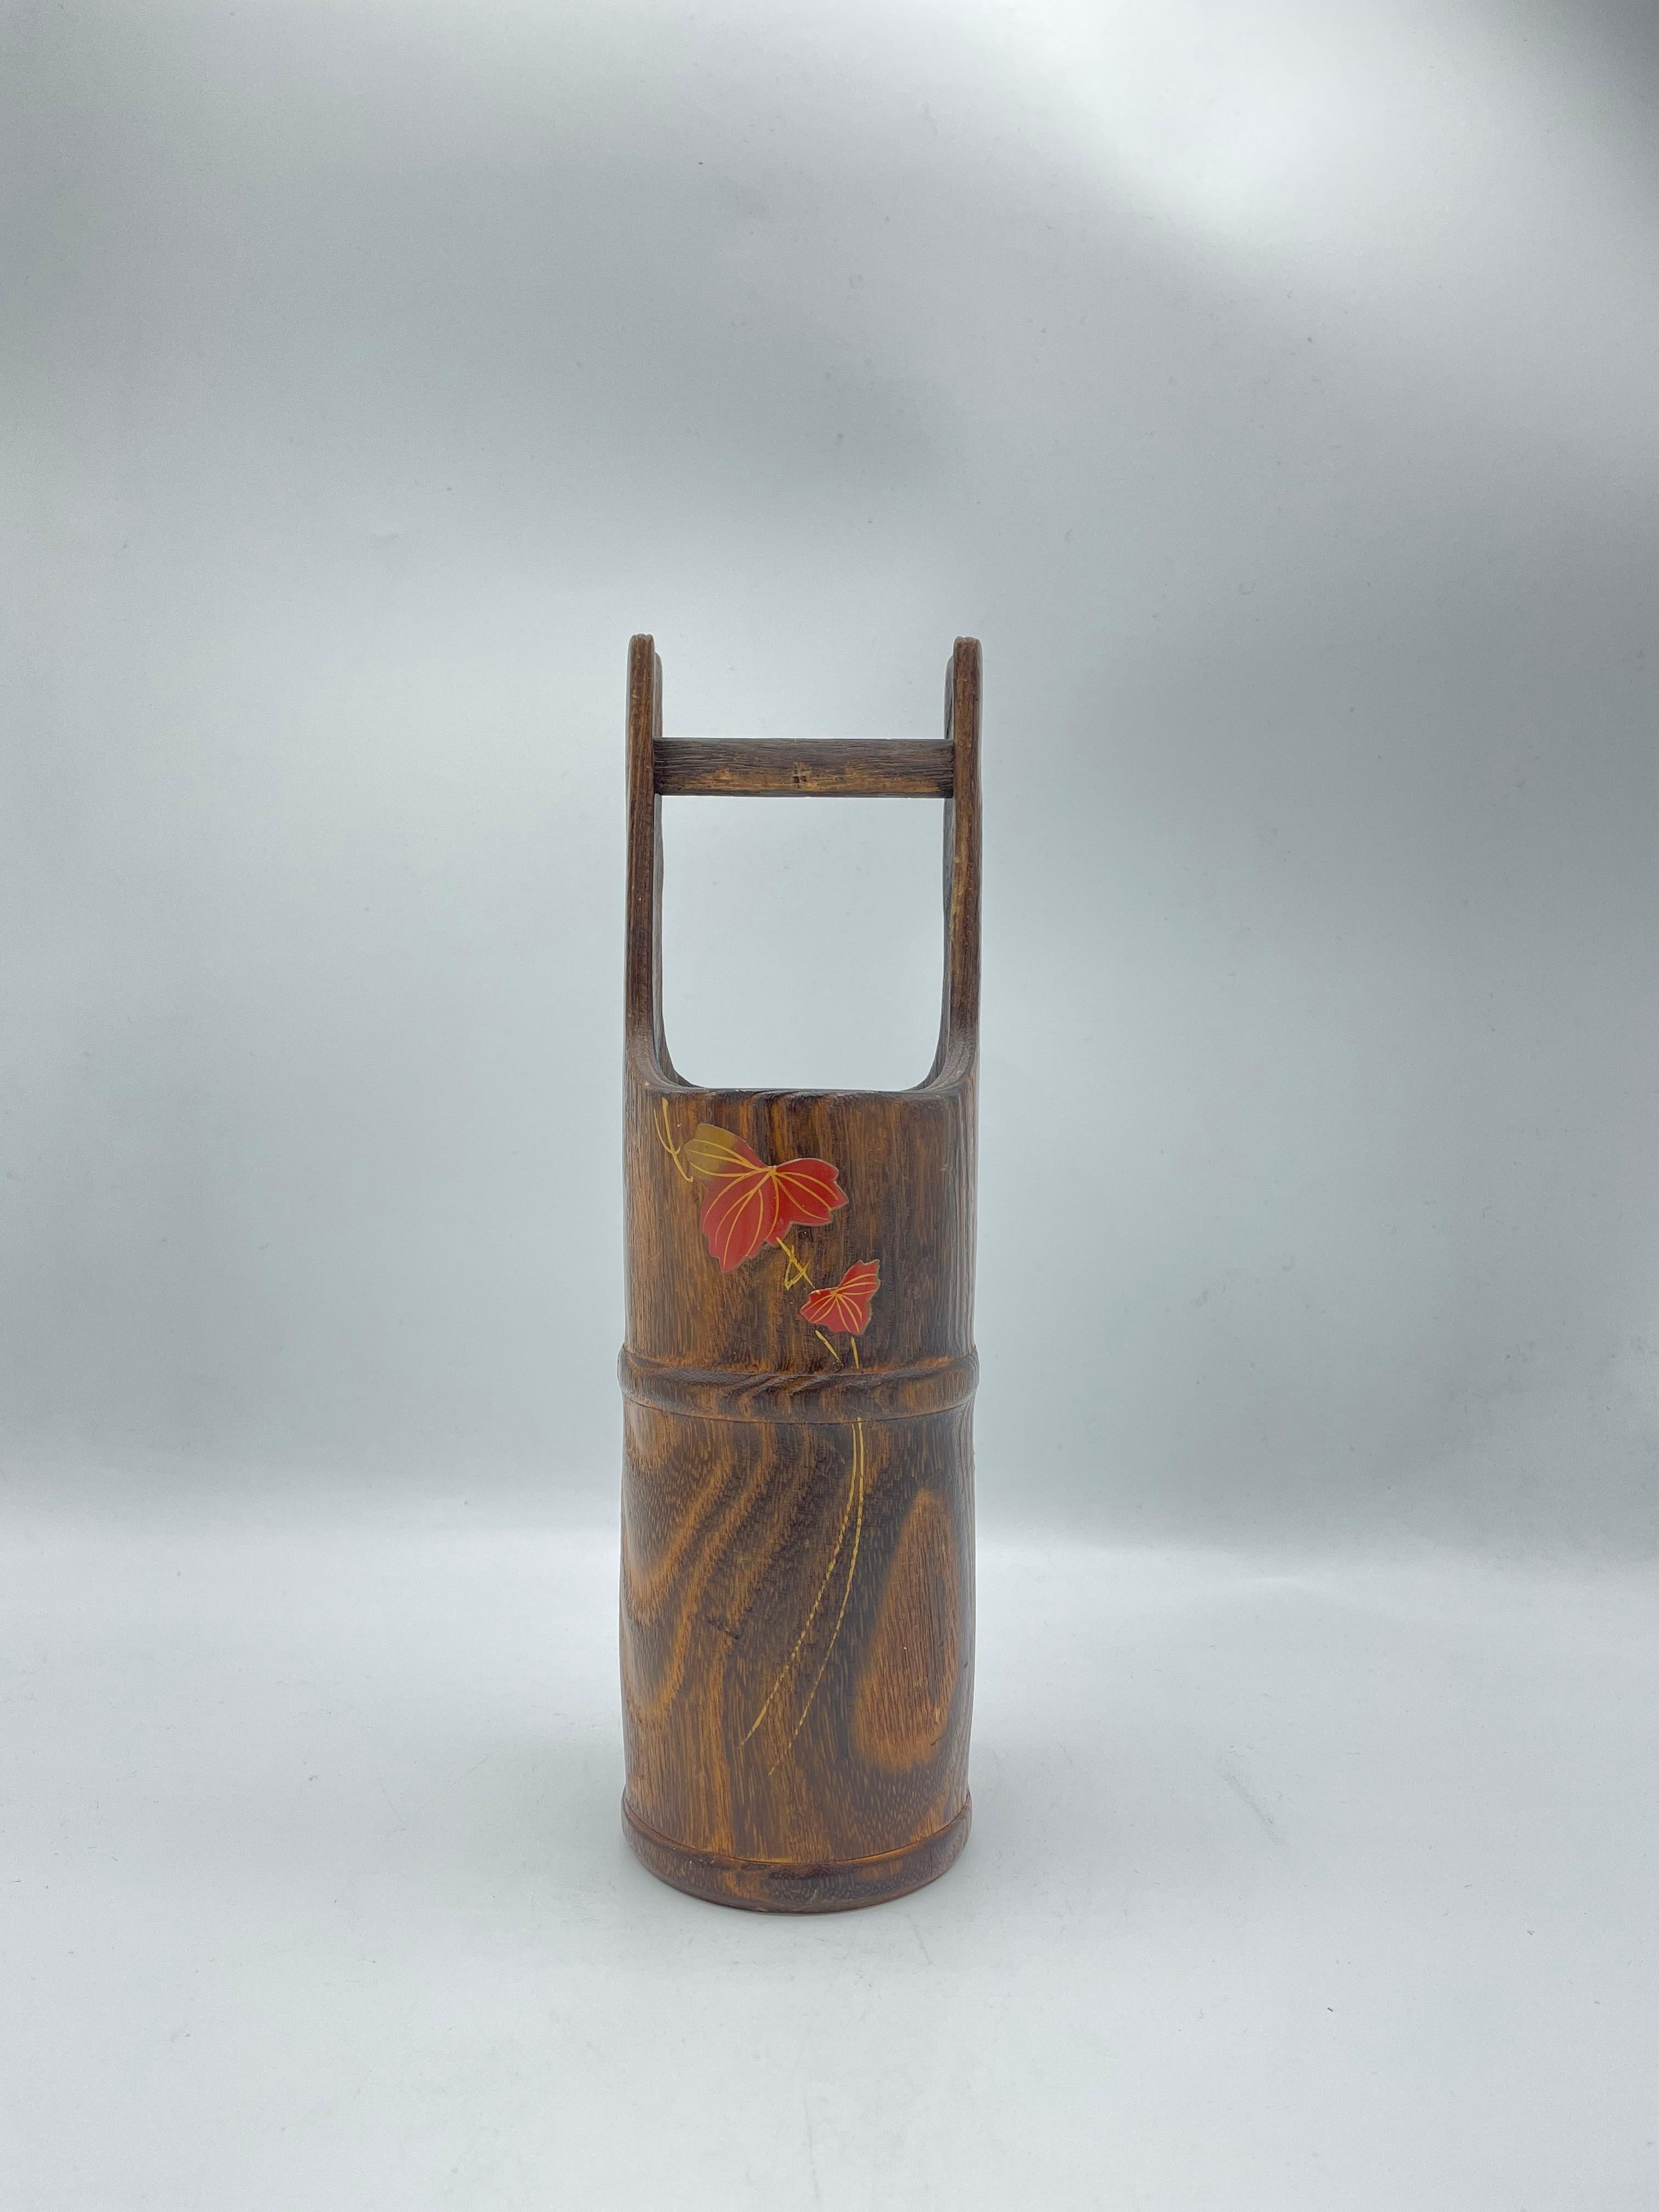 This is a flower vase which was made in Japan around 1970s in Showa era.
It is made with a wood and inside, there is a metal to put some water.
It can use as a flower vase and also as a decoration.
There are a motif of leaf of Mable. 

Dimensions:
7